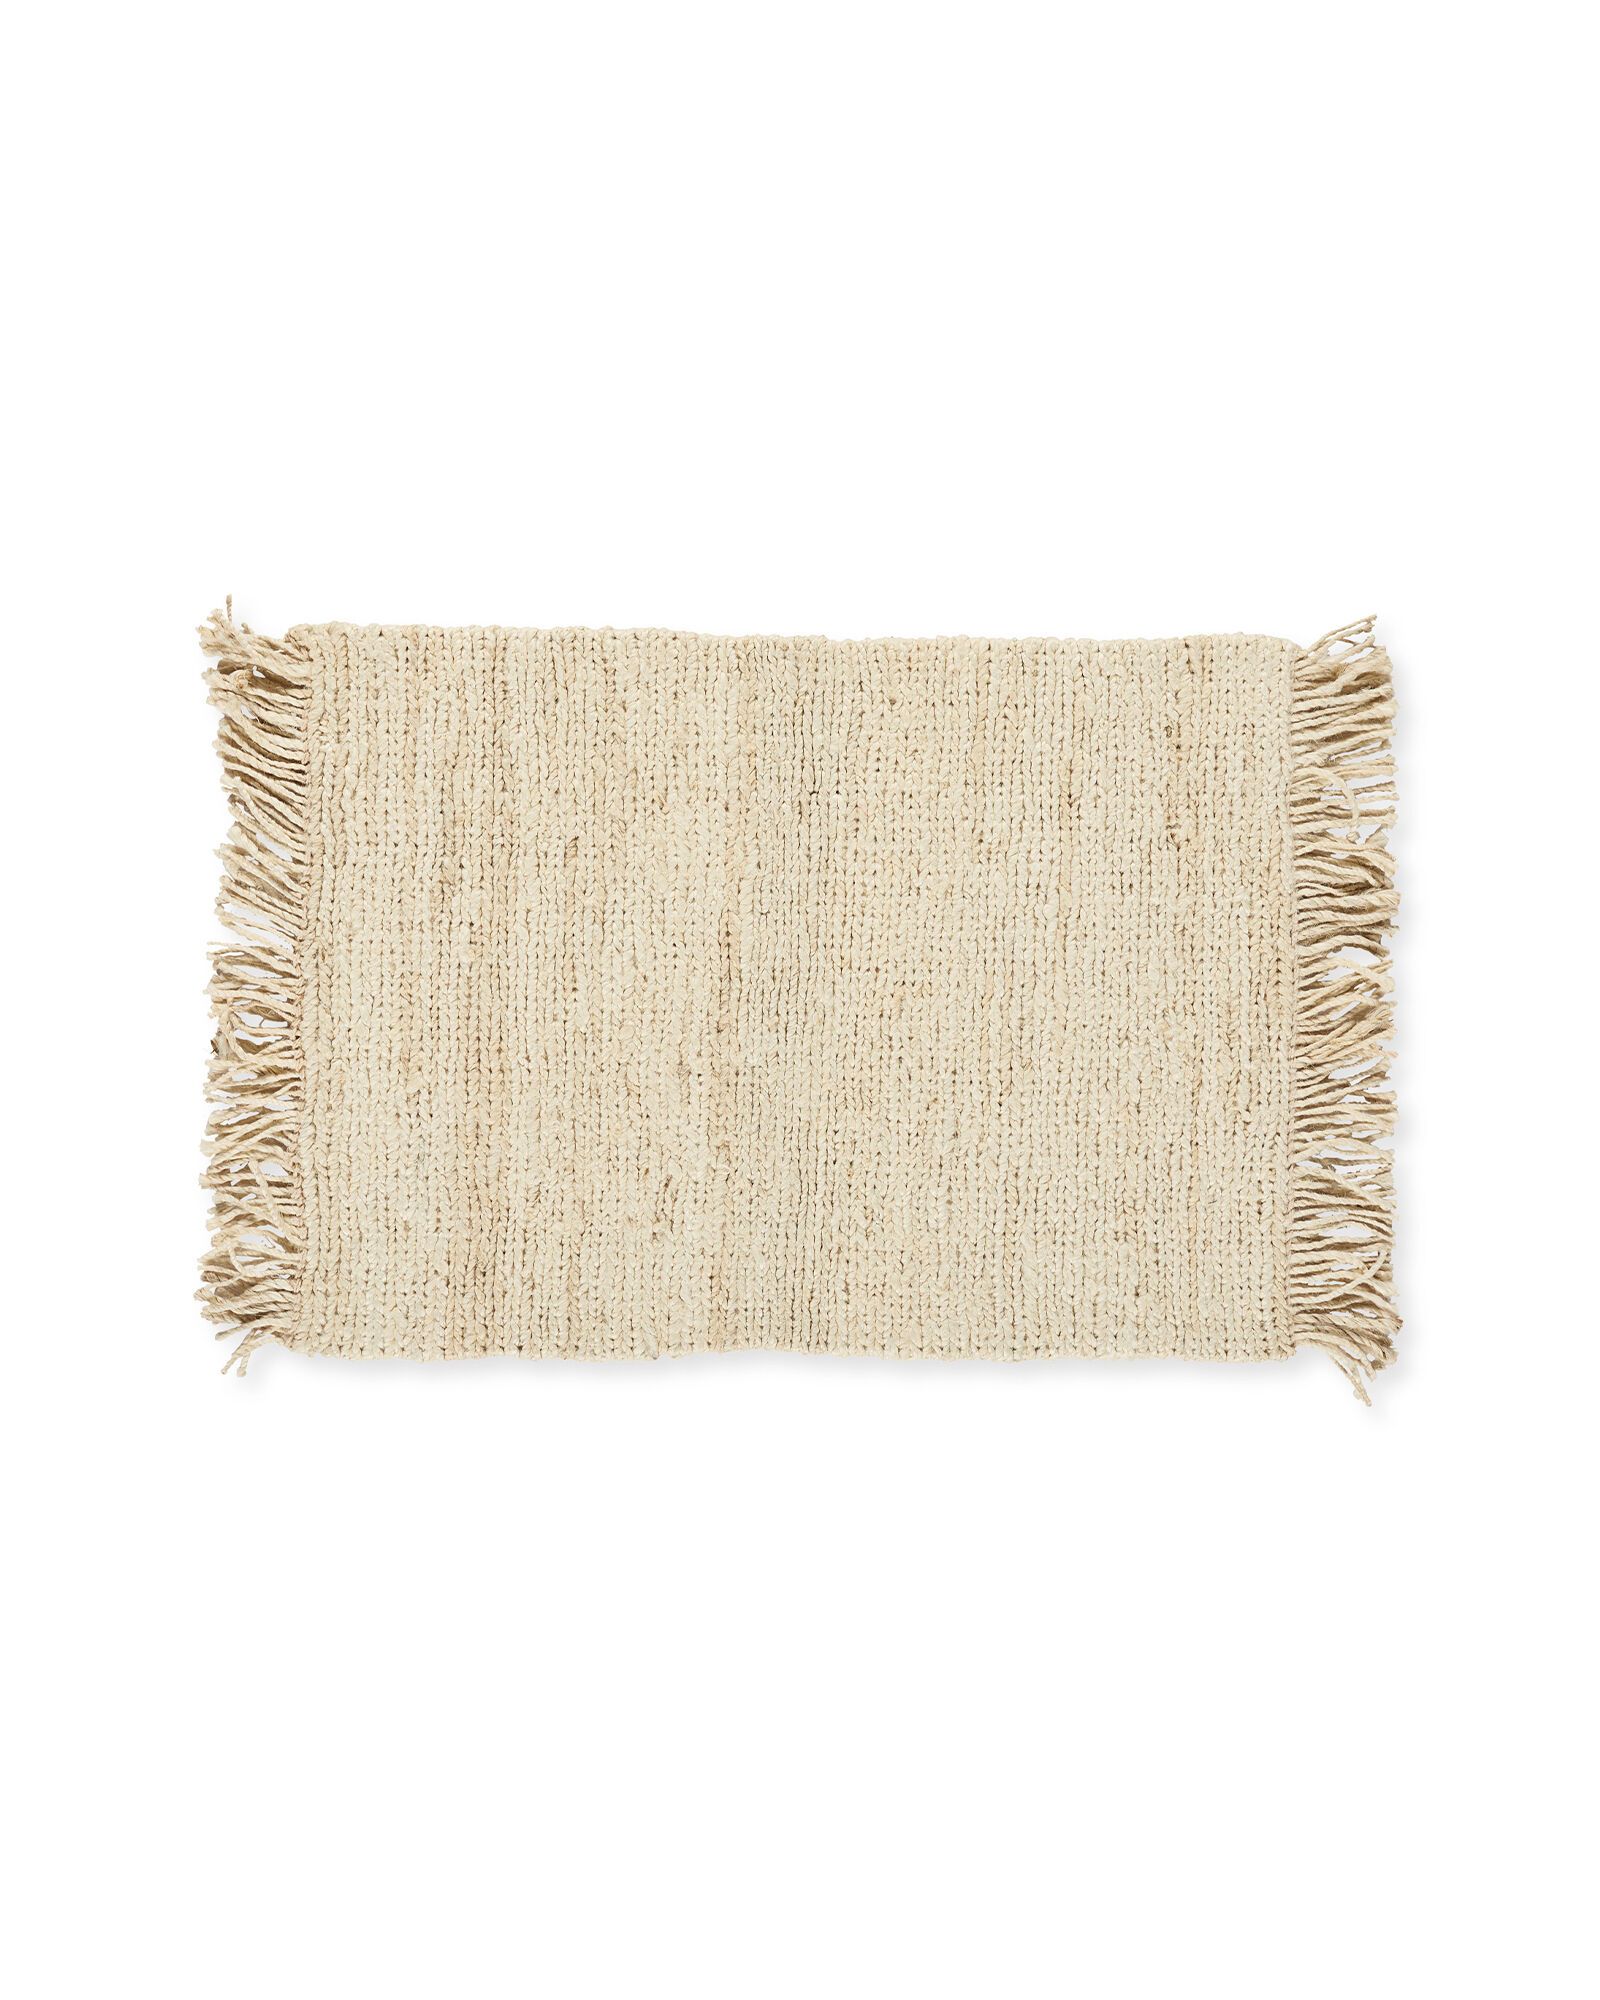 Braided Jute Mat | Serena and Lily